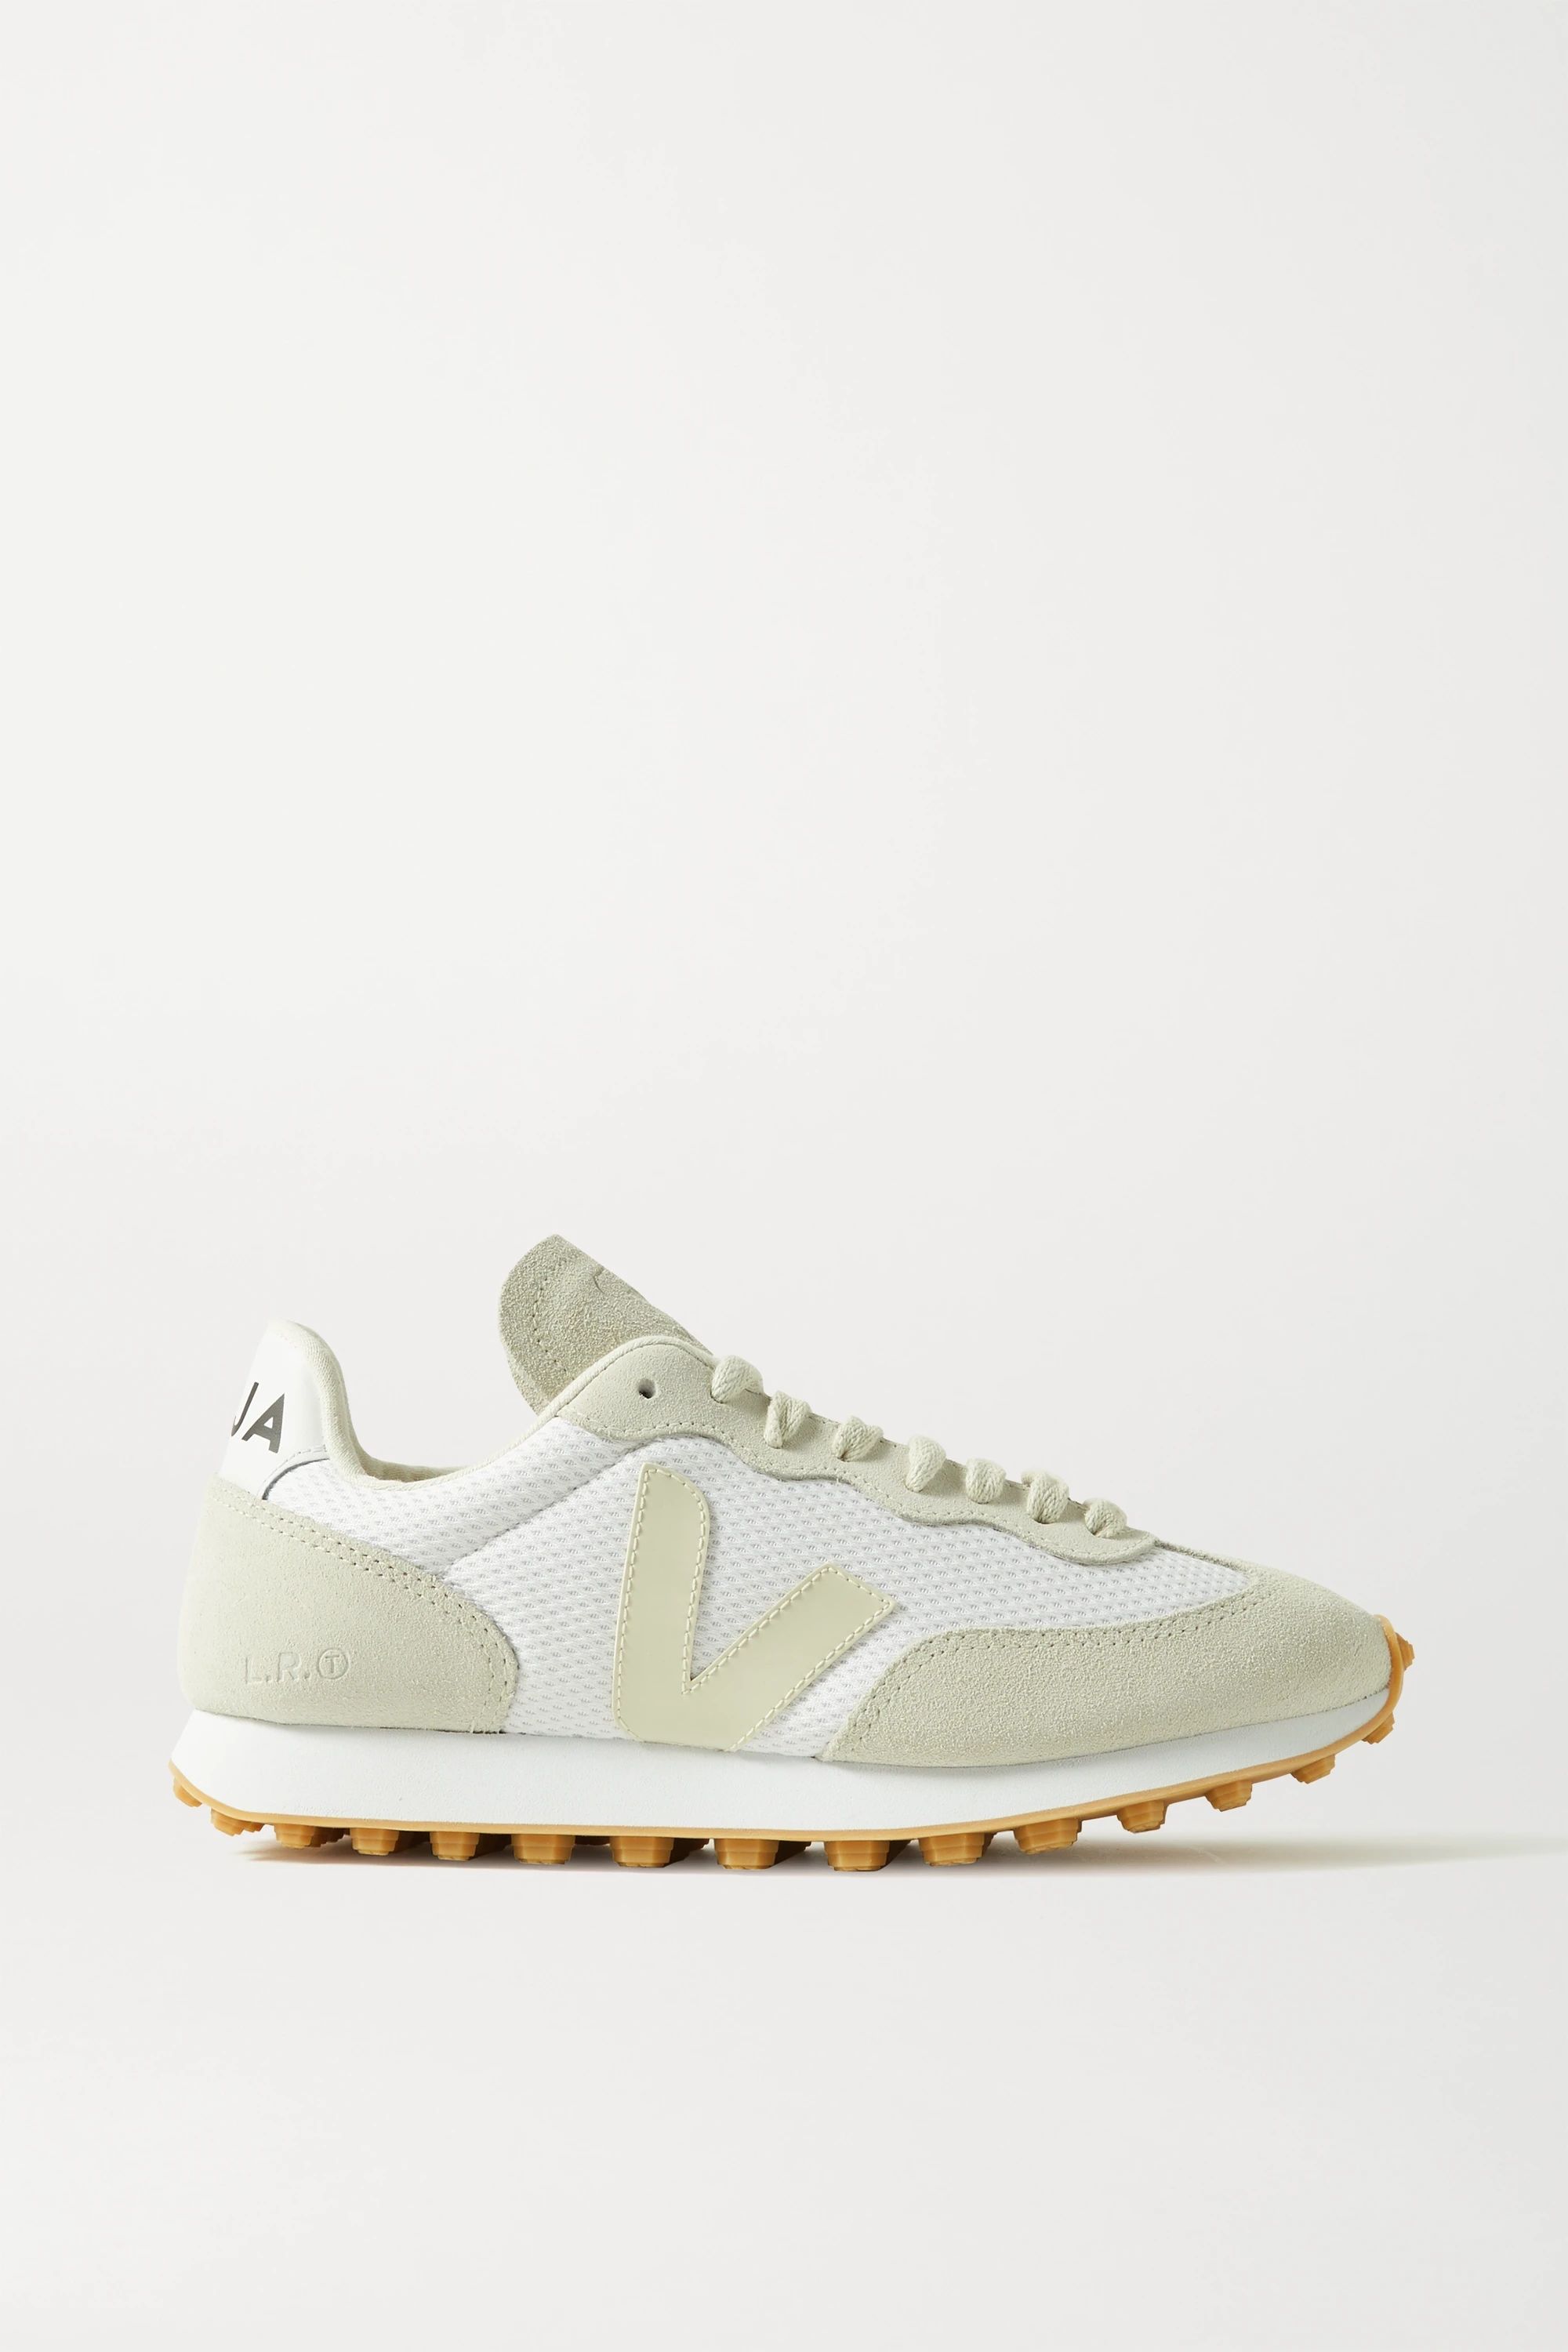 White + NET SUSTAIN Rio Branco leather-trimmed suede and mesh sneakers | Veja | NET-A-PORTER | NET-A-PORTER (US)